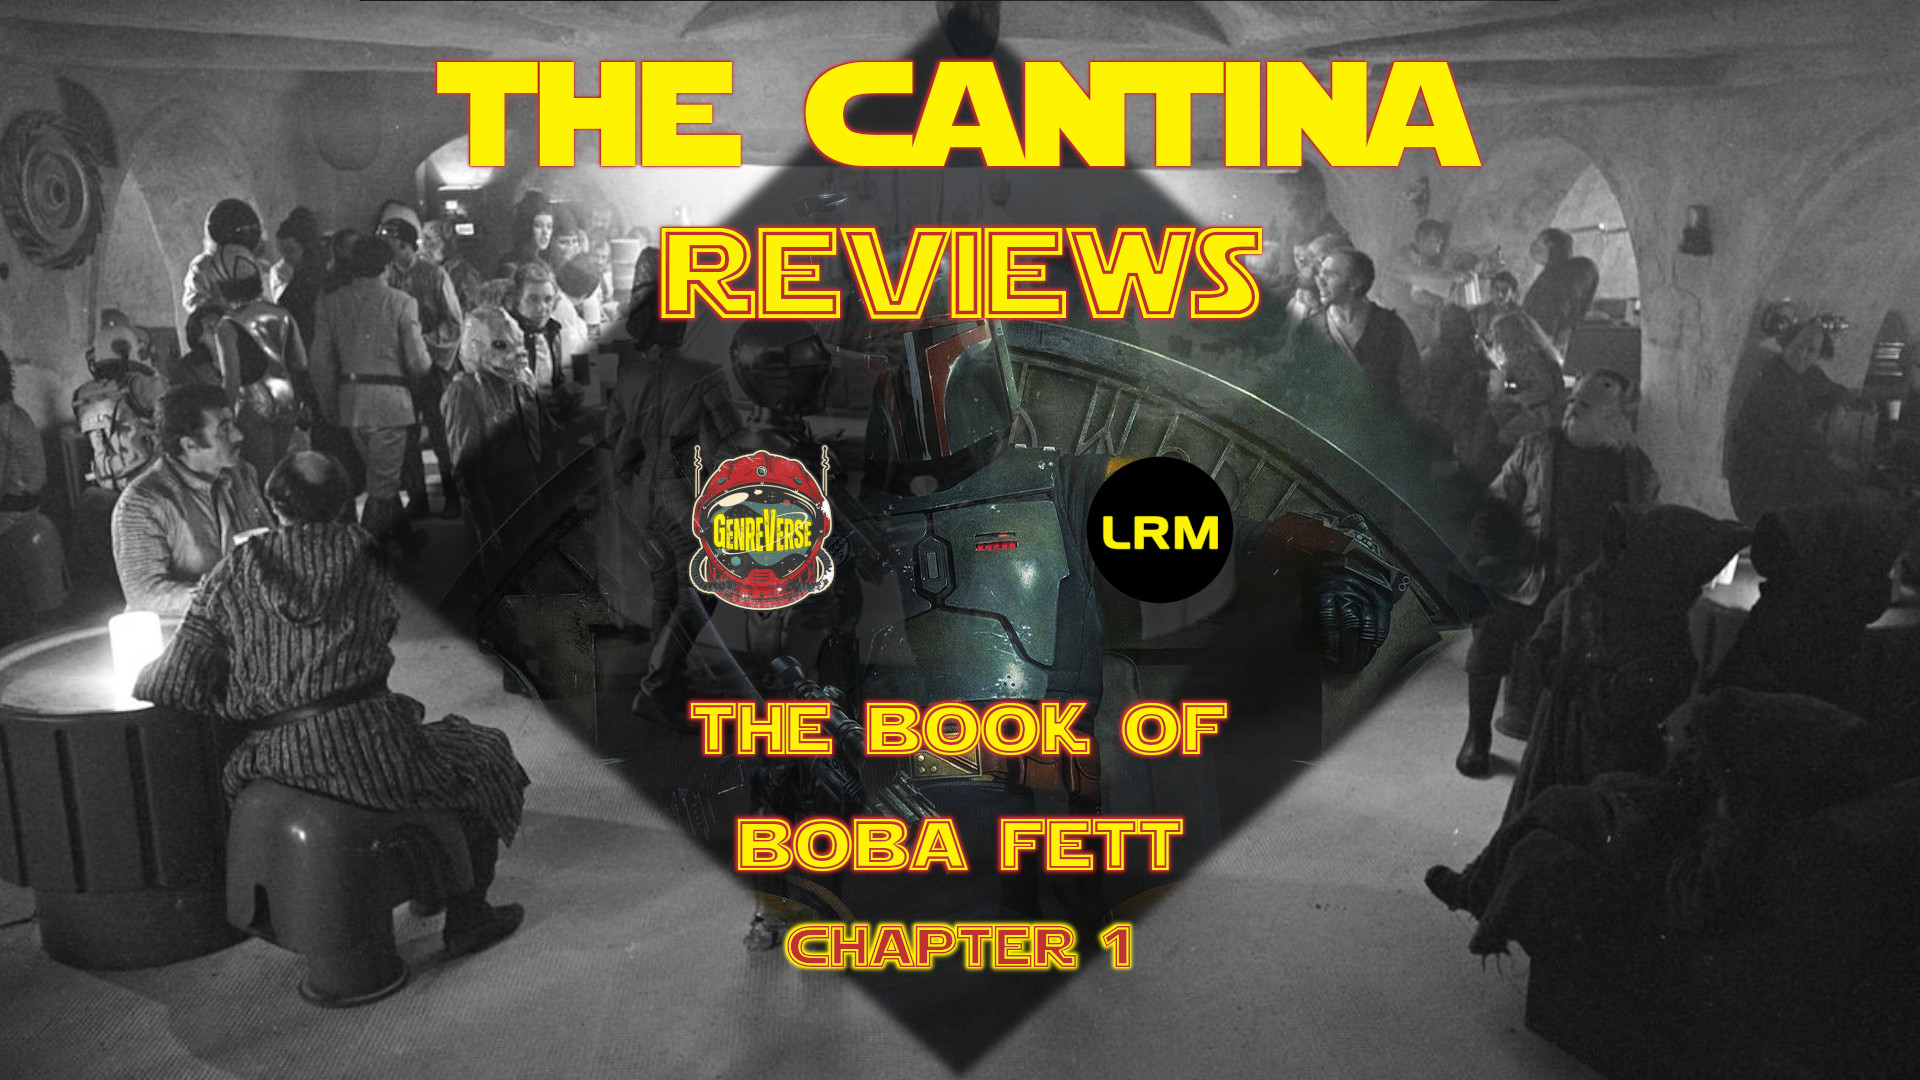 The Book Of Boba Fett Chapter 1 Review: An Intriguing But Shaky Start | The Cantina Reviews